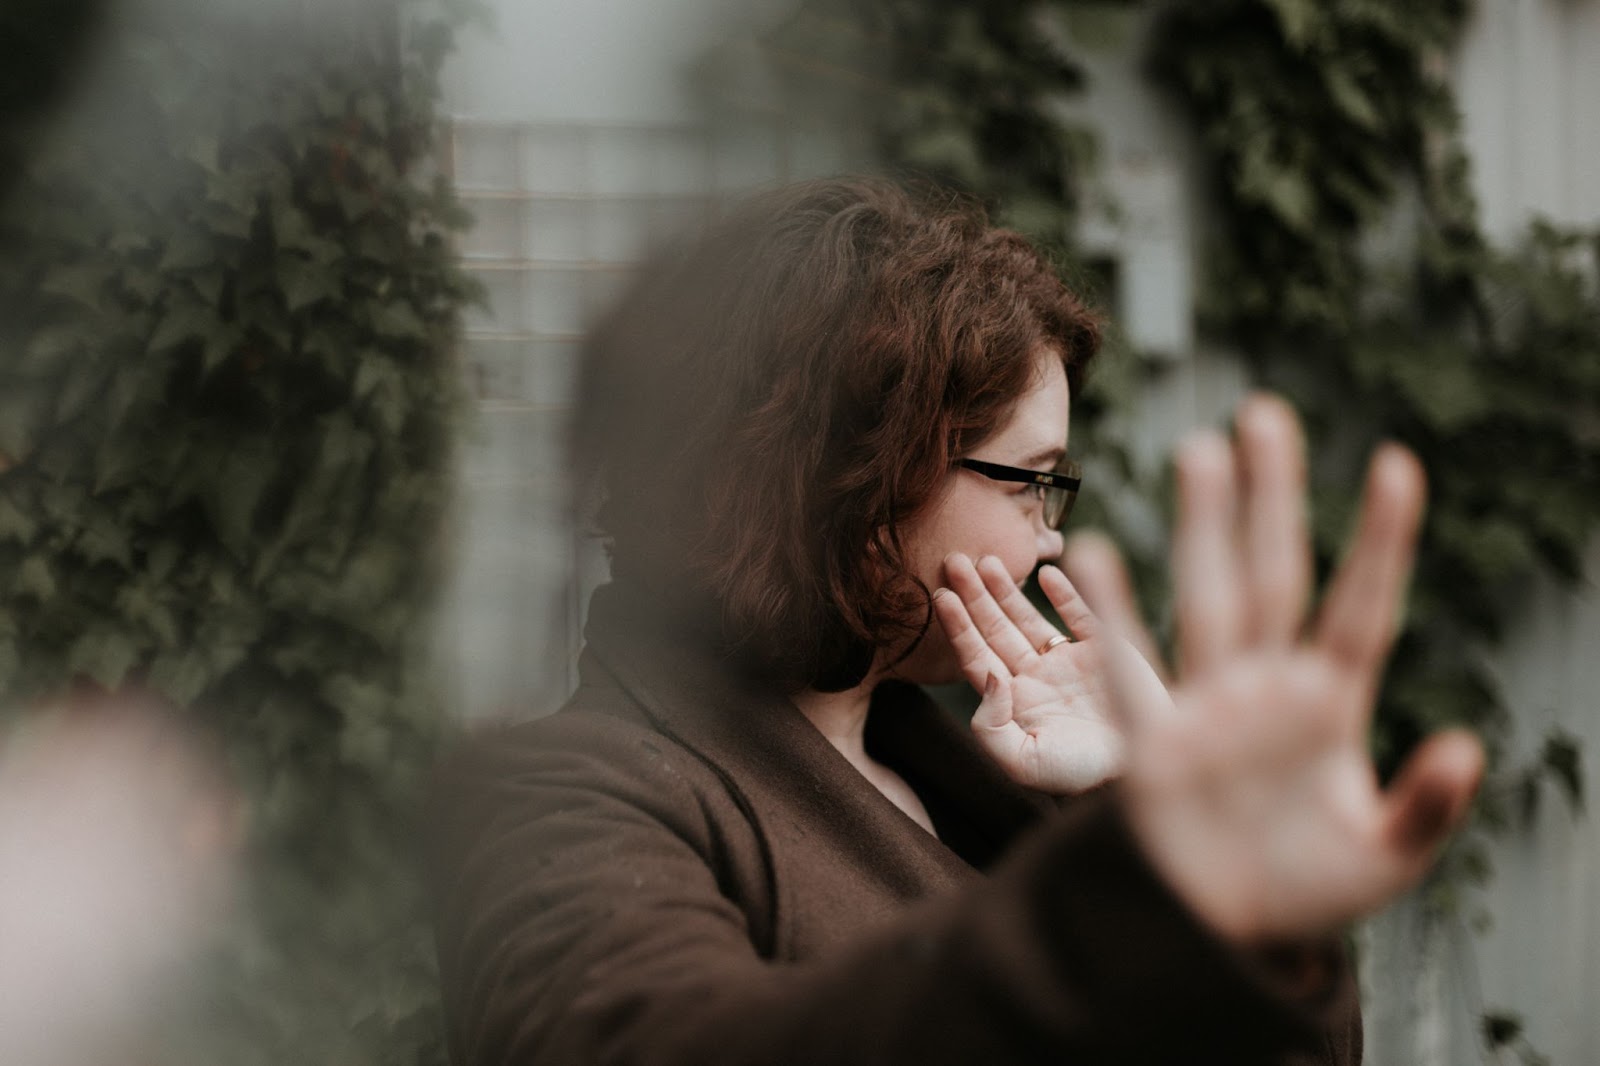 A slightly out of focus shot of a woman with her head turned and her hands raised, as if refusing something.